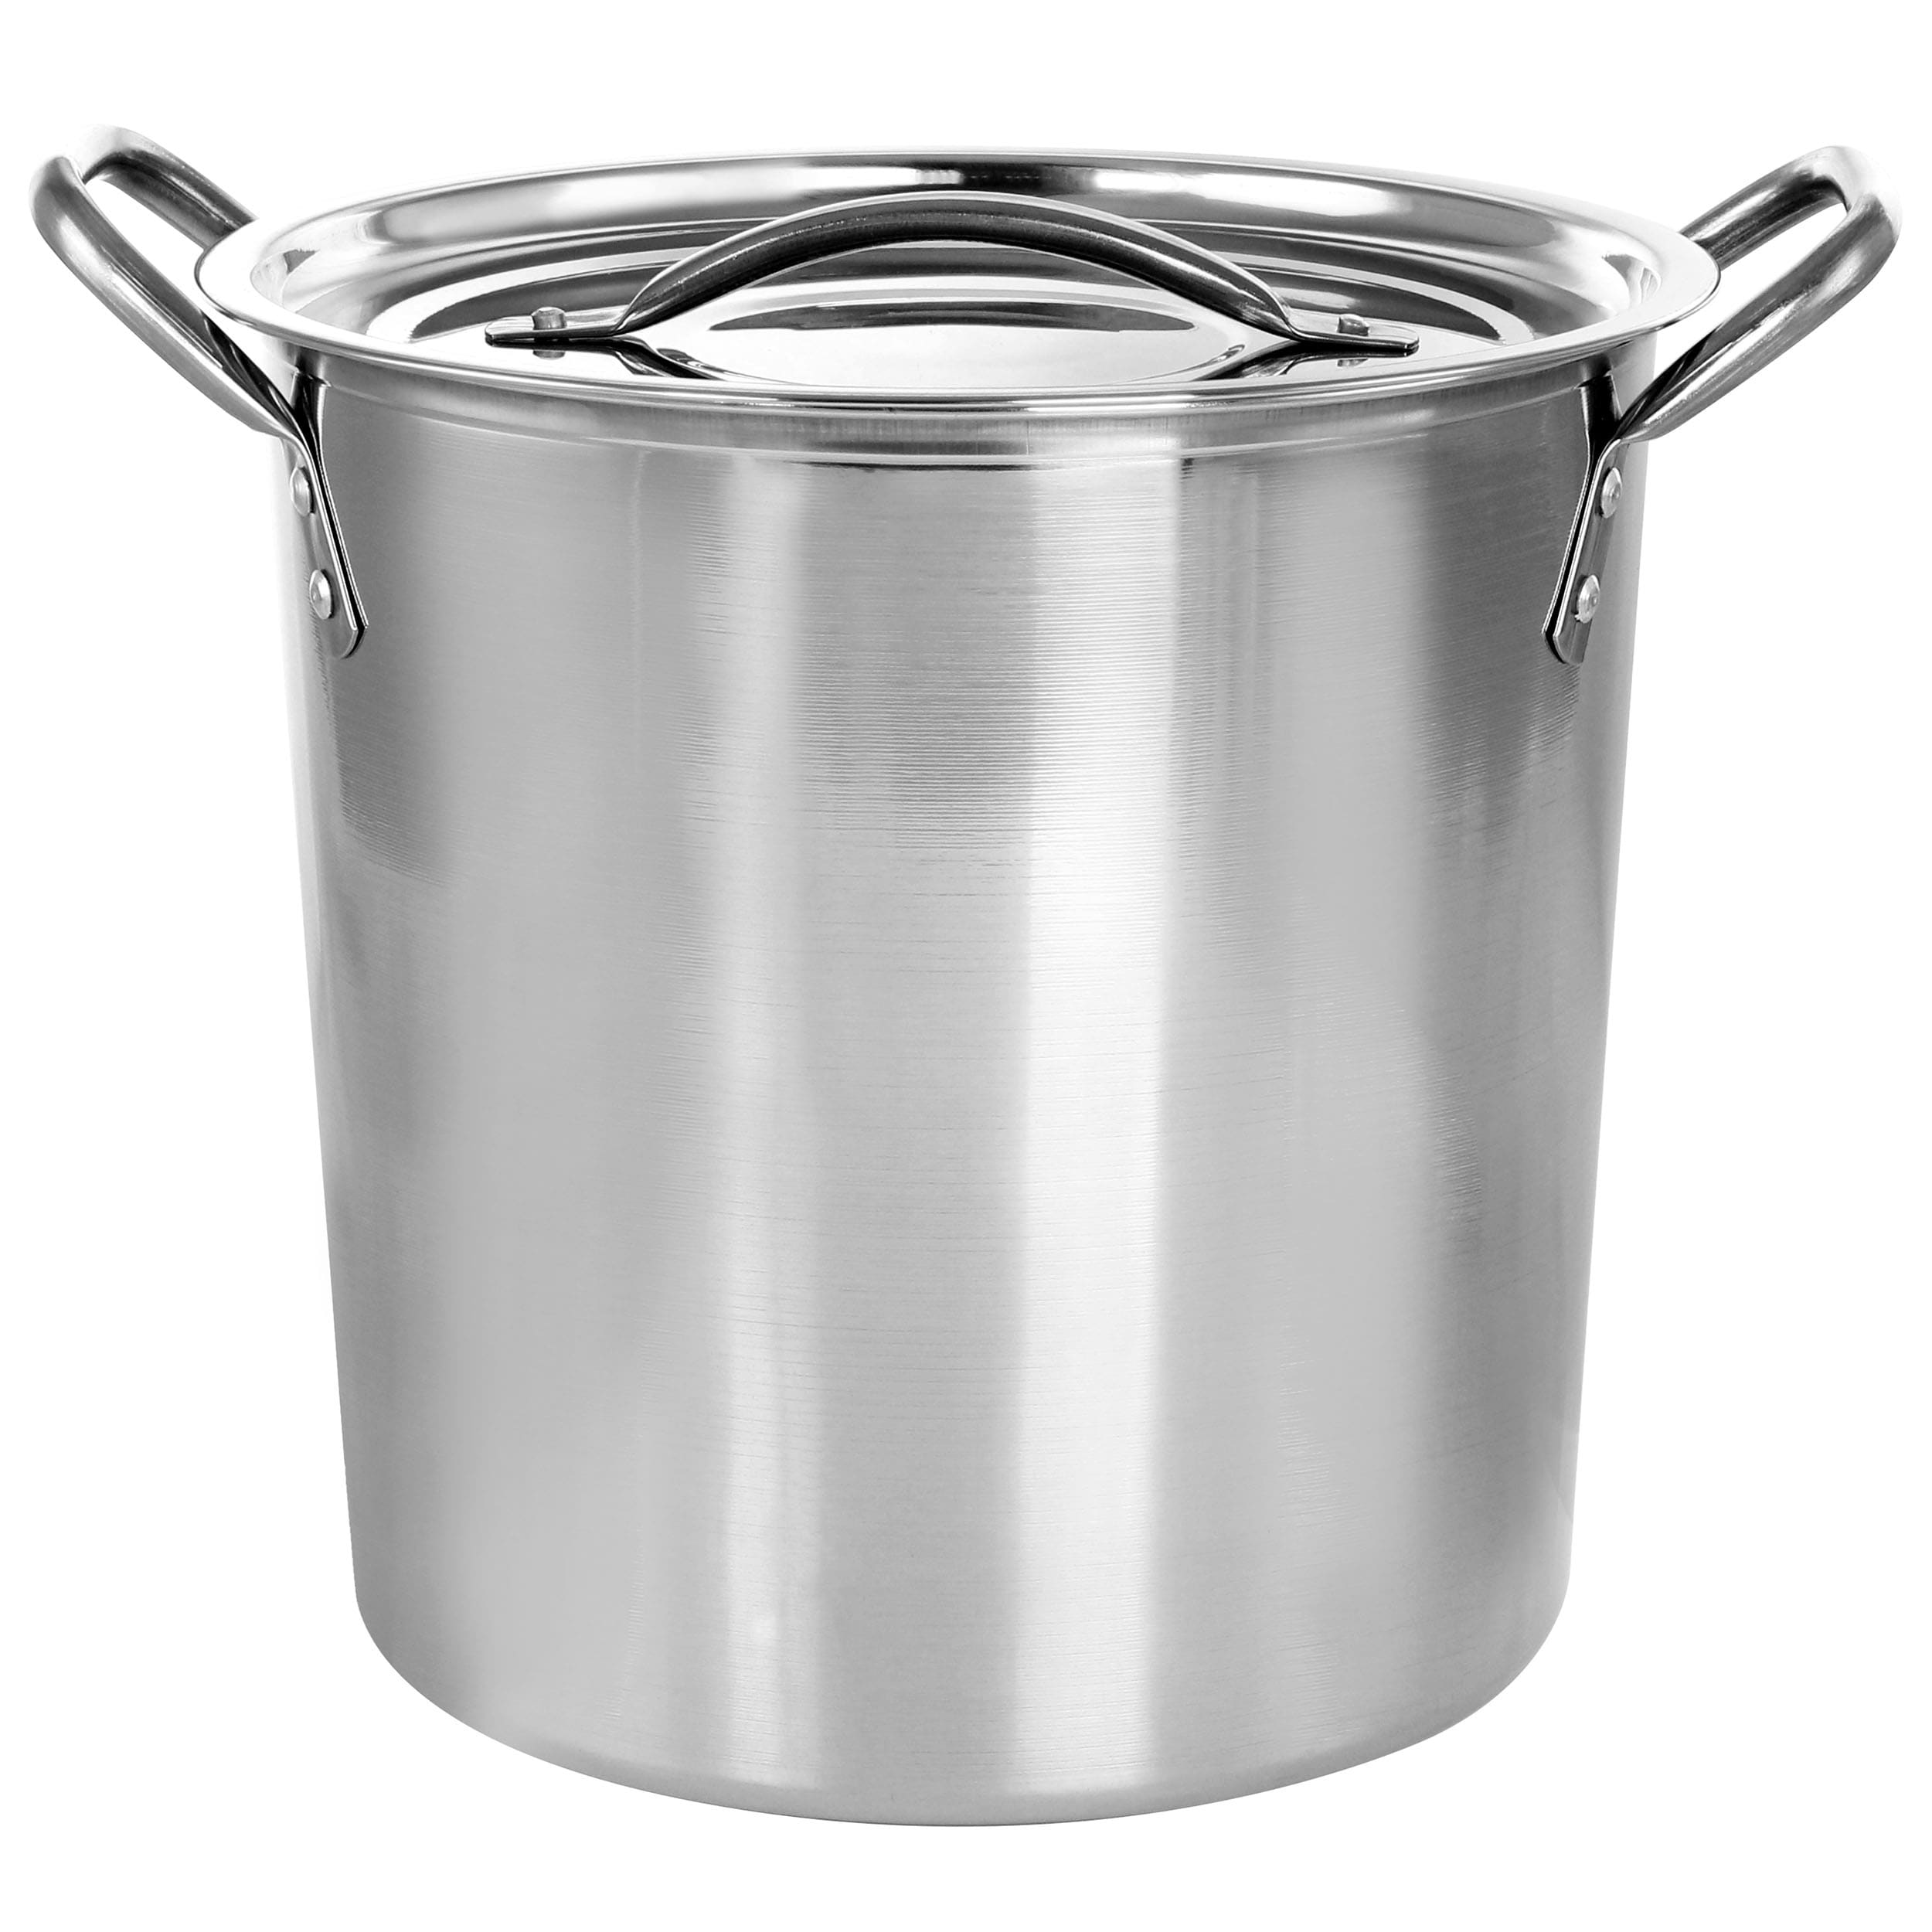 https://ak1.ostkcdn.com/images/products/is/images/direct/33fbb39f21fb35b1c31d30cd023c0730e683c229/Gibson-Everyday-Whittington-8-Quart-Stainless-Steel-Stock-Pot-with-Lid.jpg